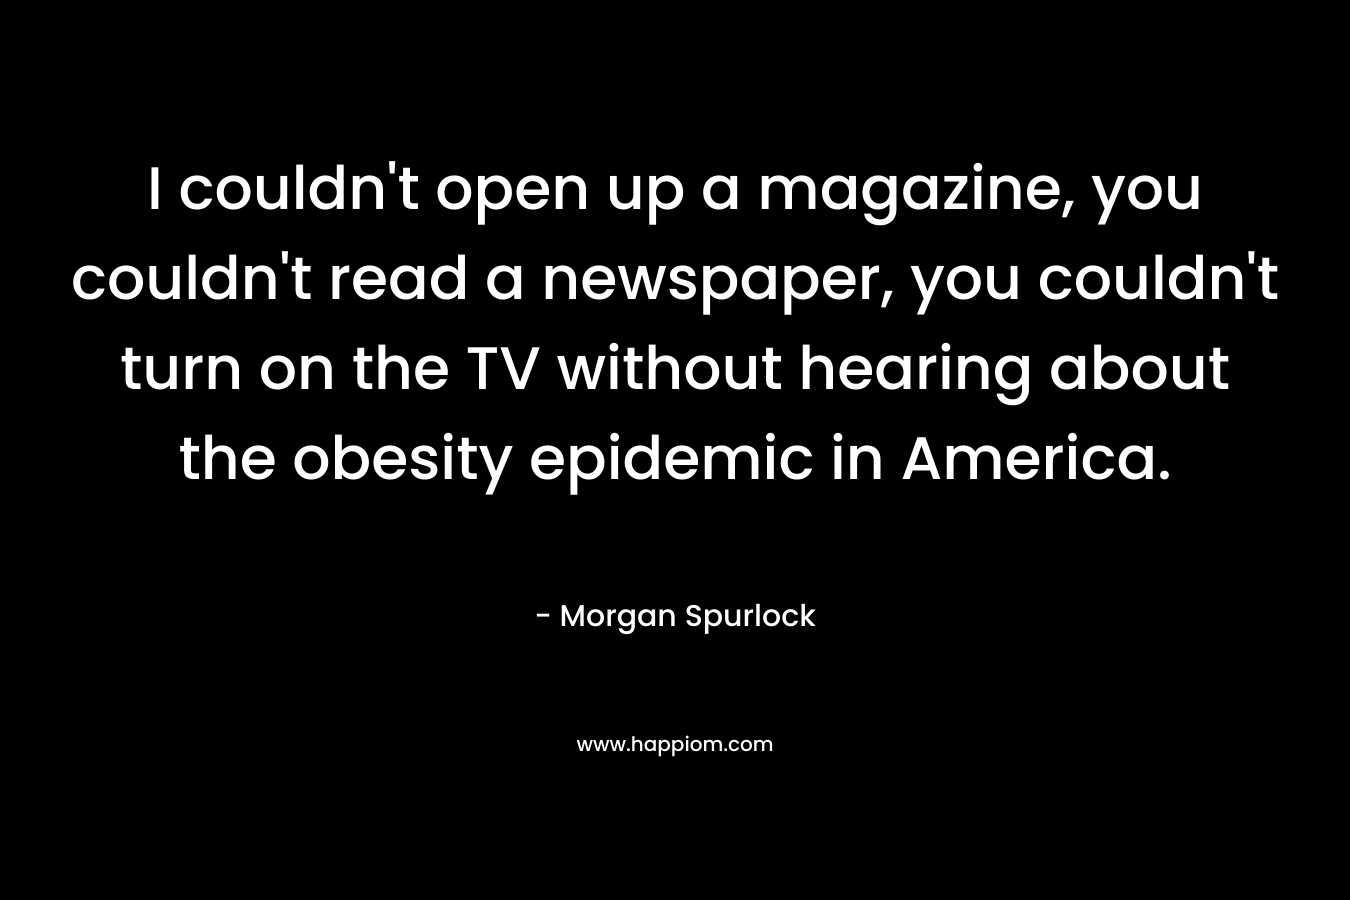 I couldn't open up a magazine, you couldn't read a newspaper, you couldn't turn on the TV without hearing about the obesity epidemic in America.